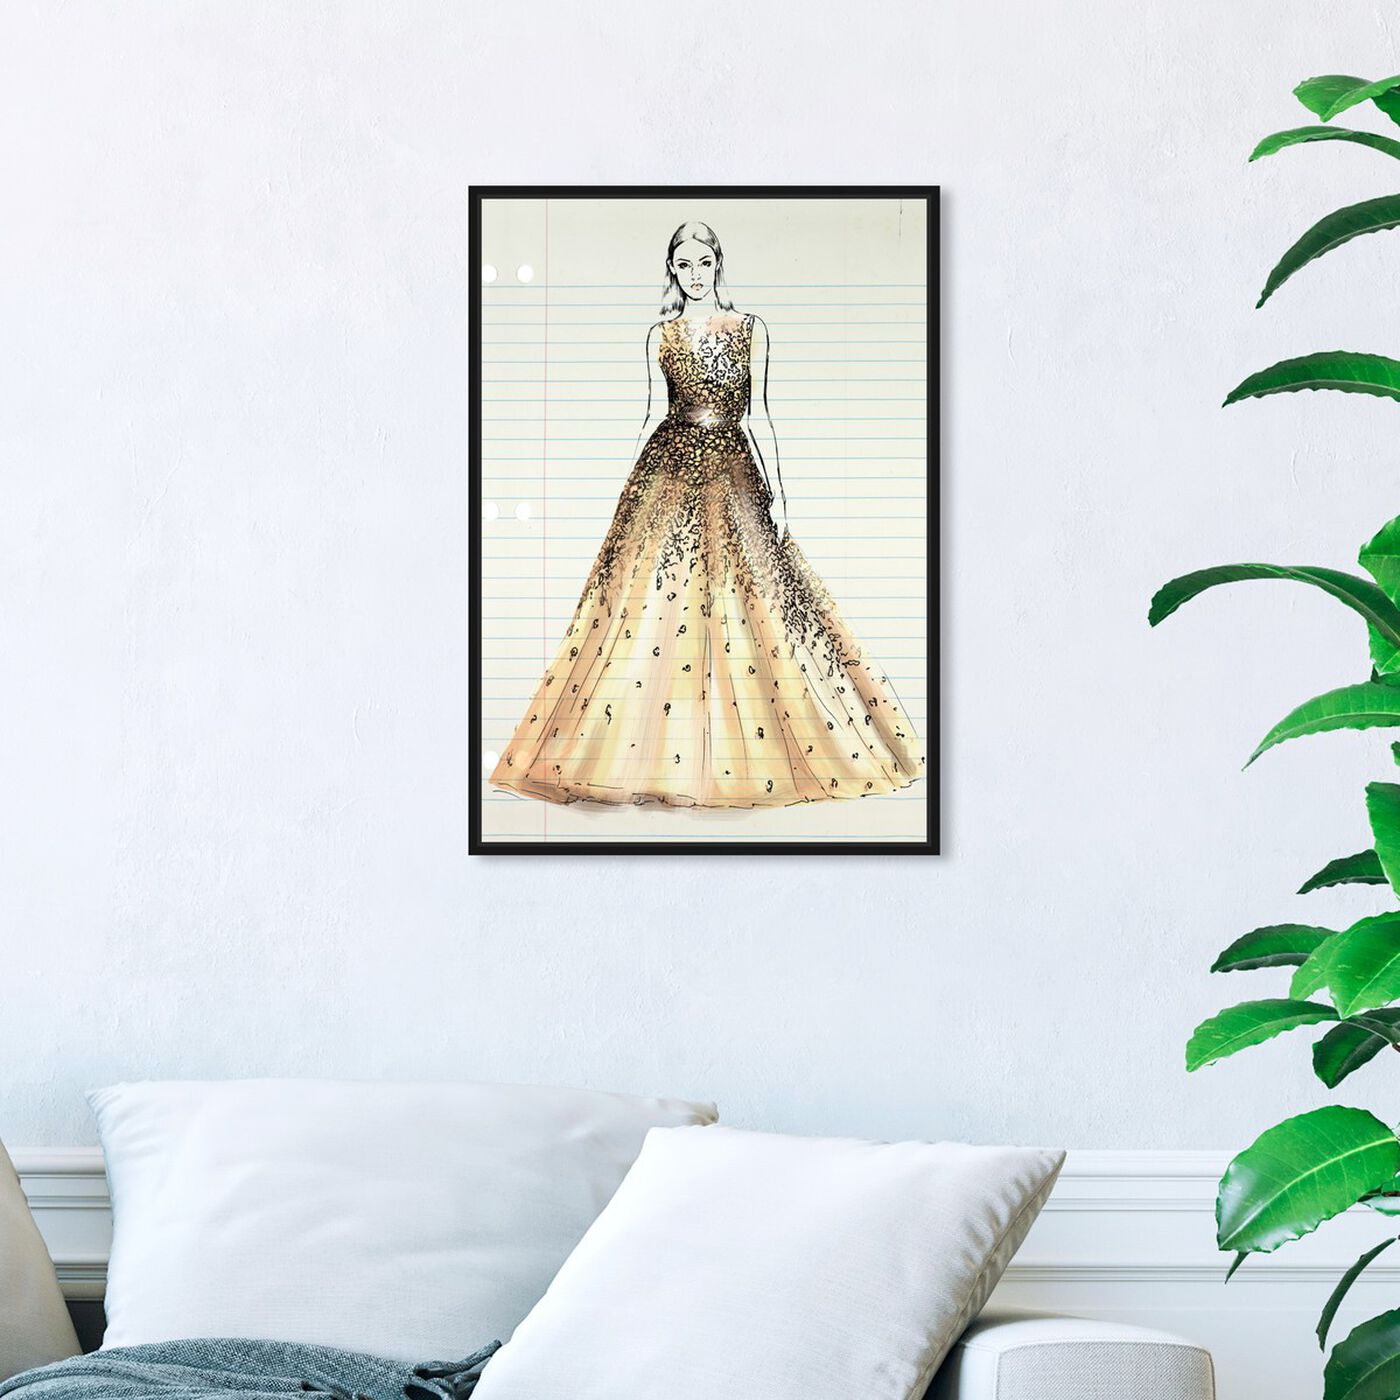 Hanging view of Fashion Illustration 3 featuring fashion and glam and dress art.